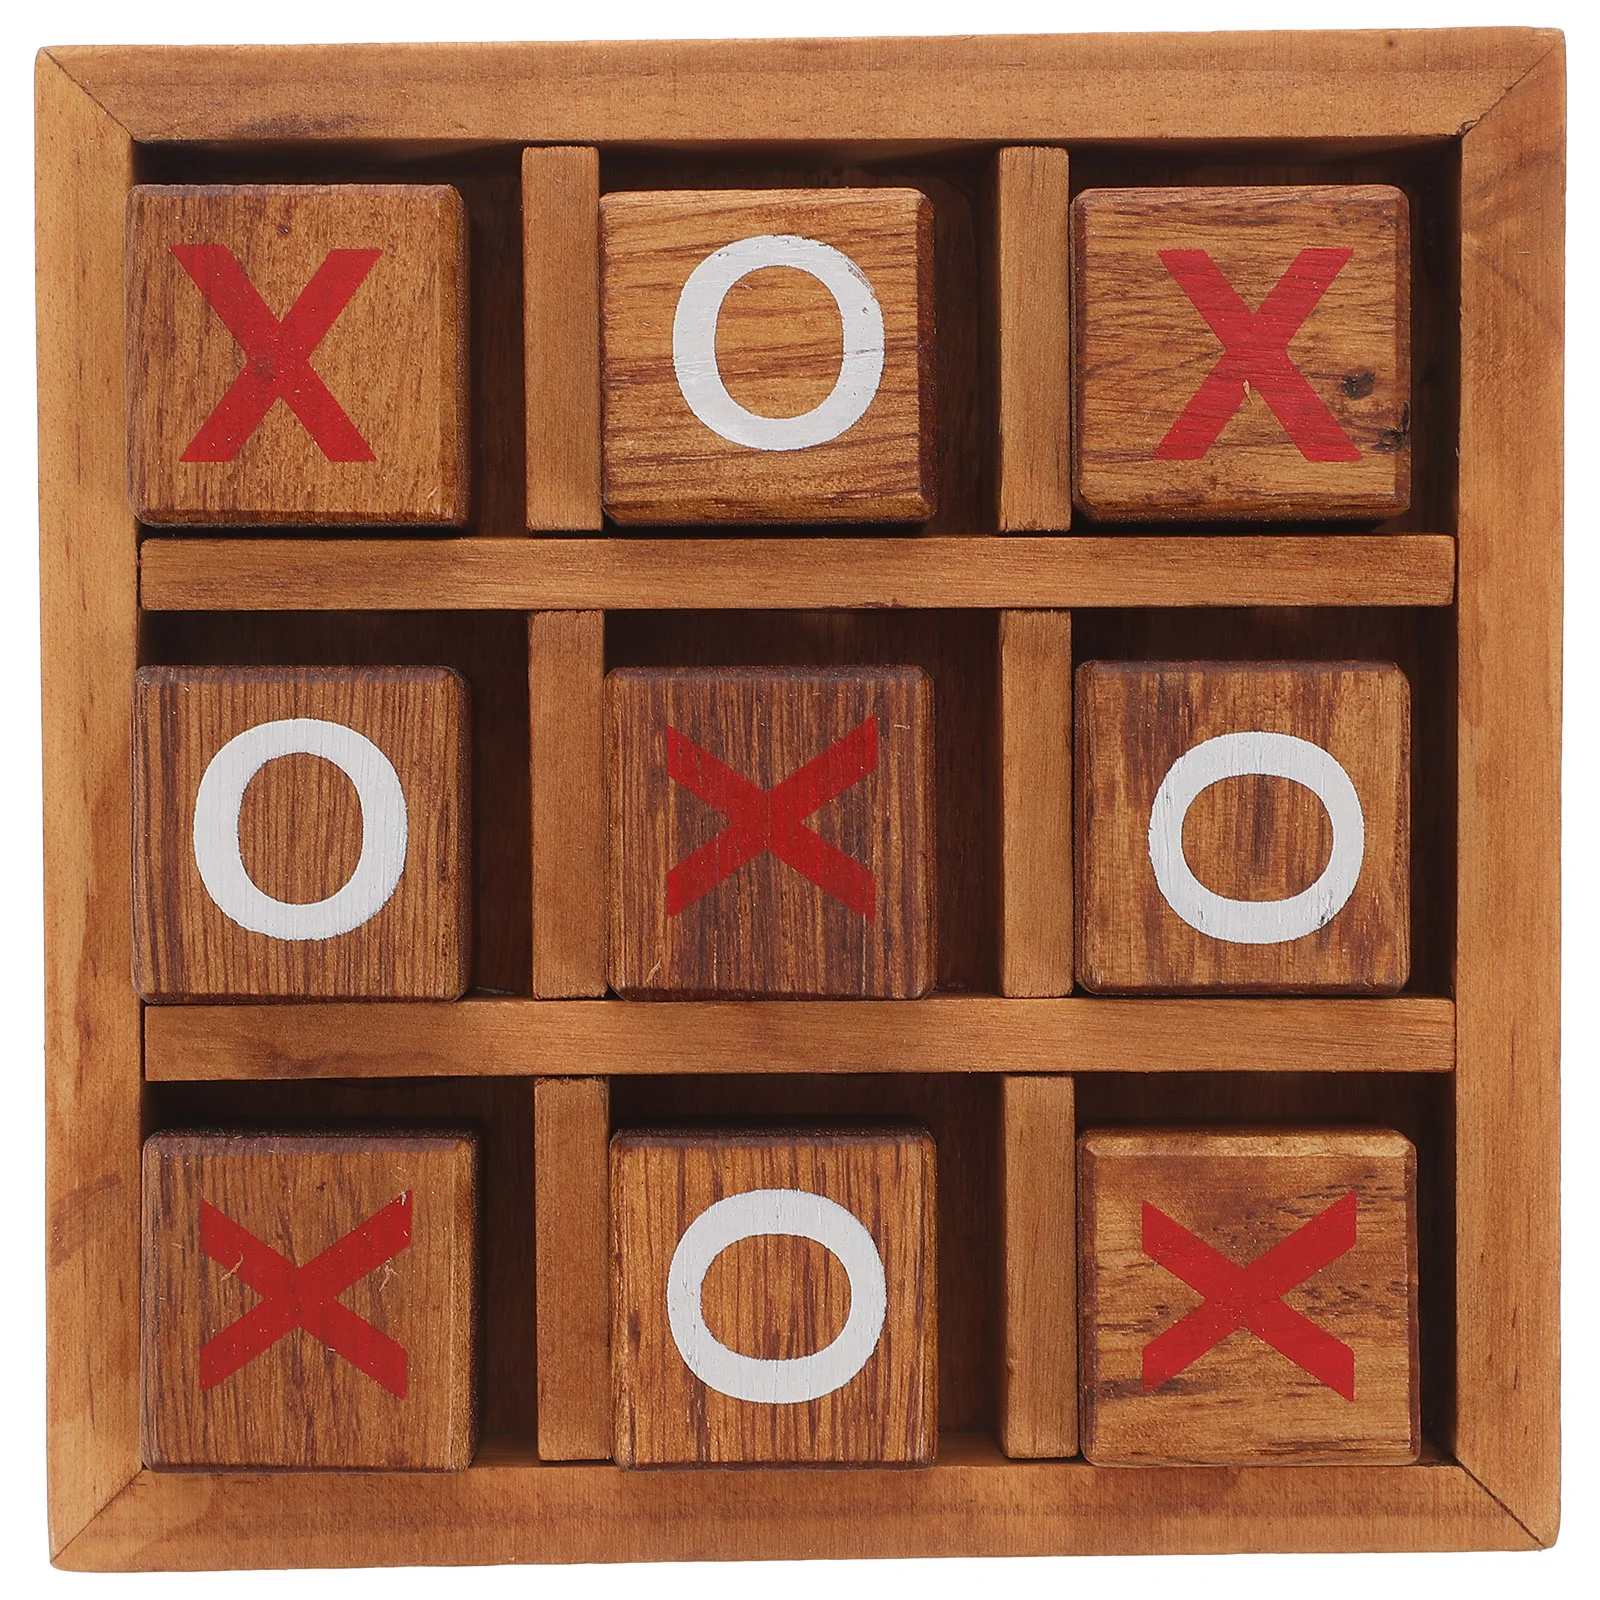 

Checkerboard Xo Chess Children's Toys Parent-child Wooden Jigsaw Puzzles Adults Solitaire Game Classic Games